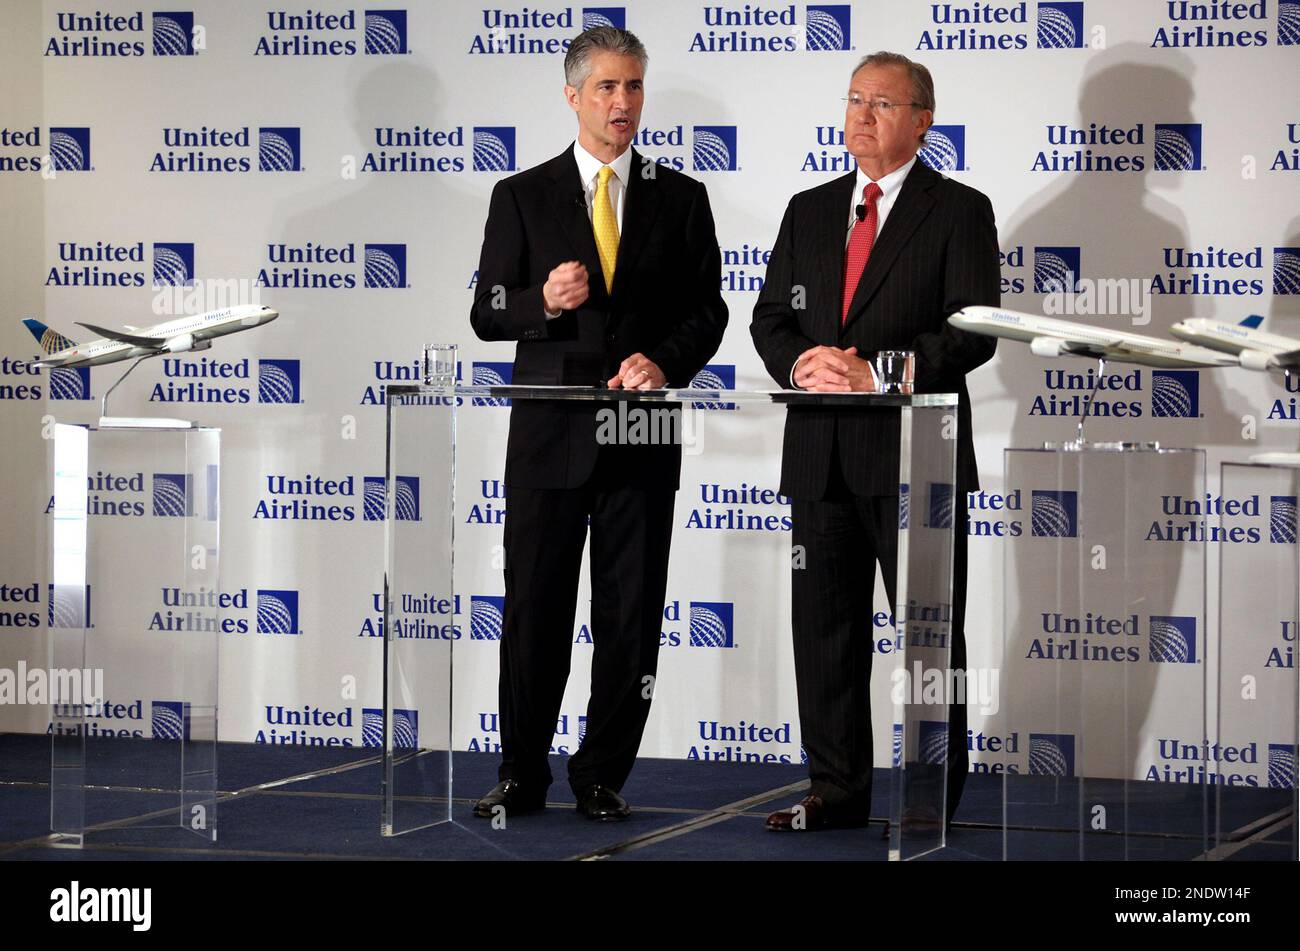 Continental Airlines CEO Jeff Smisek, left, speaks as United Airlines CEO Glenn Tilton stands with him at a news conference in New York Monday, May 3, 2010. United Airlines is purchasing Continental Airlines. (AP Photo/Craig Ruttle) Stock Photo